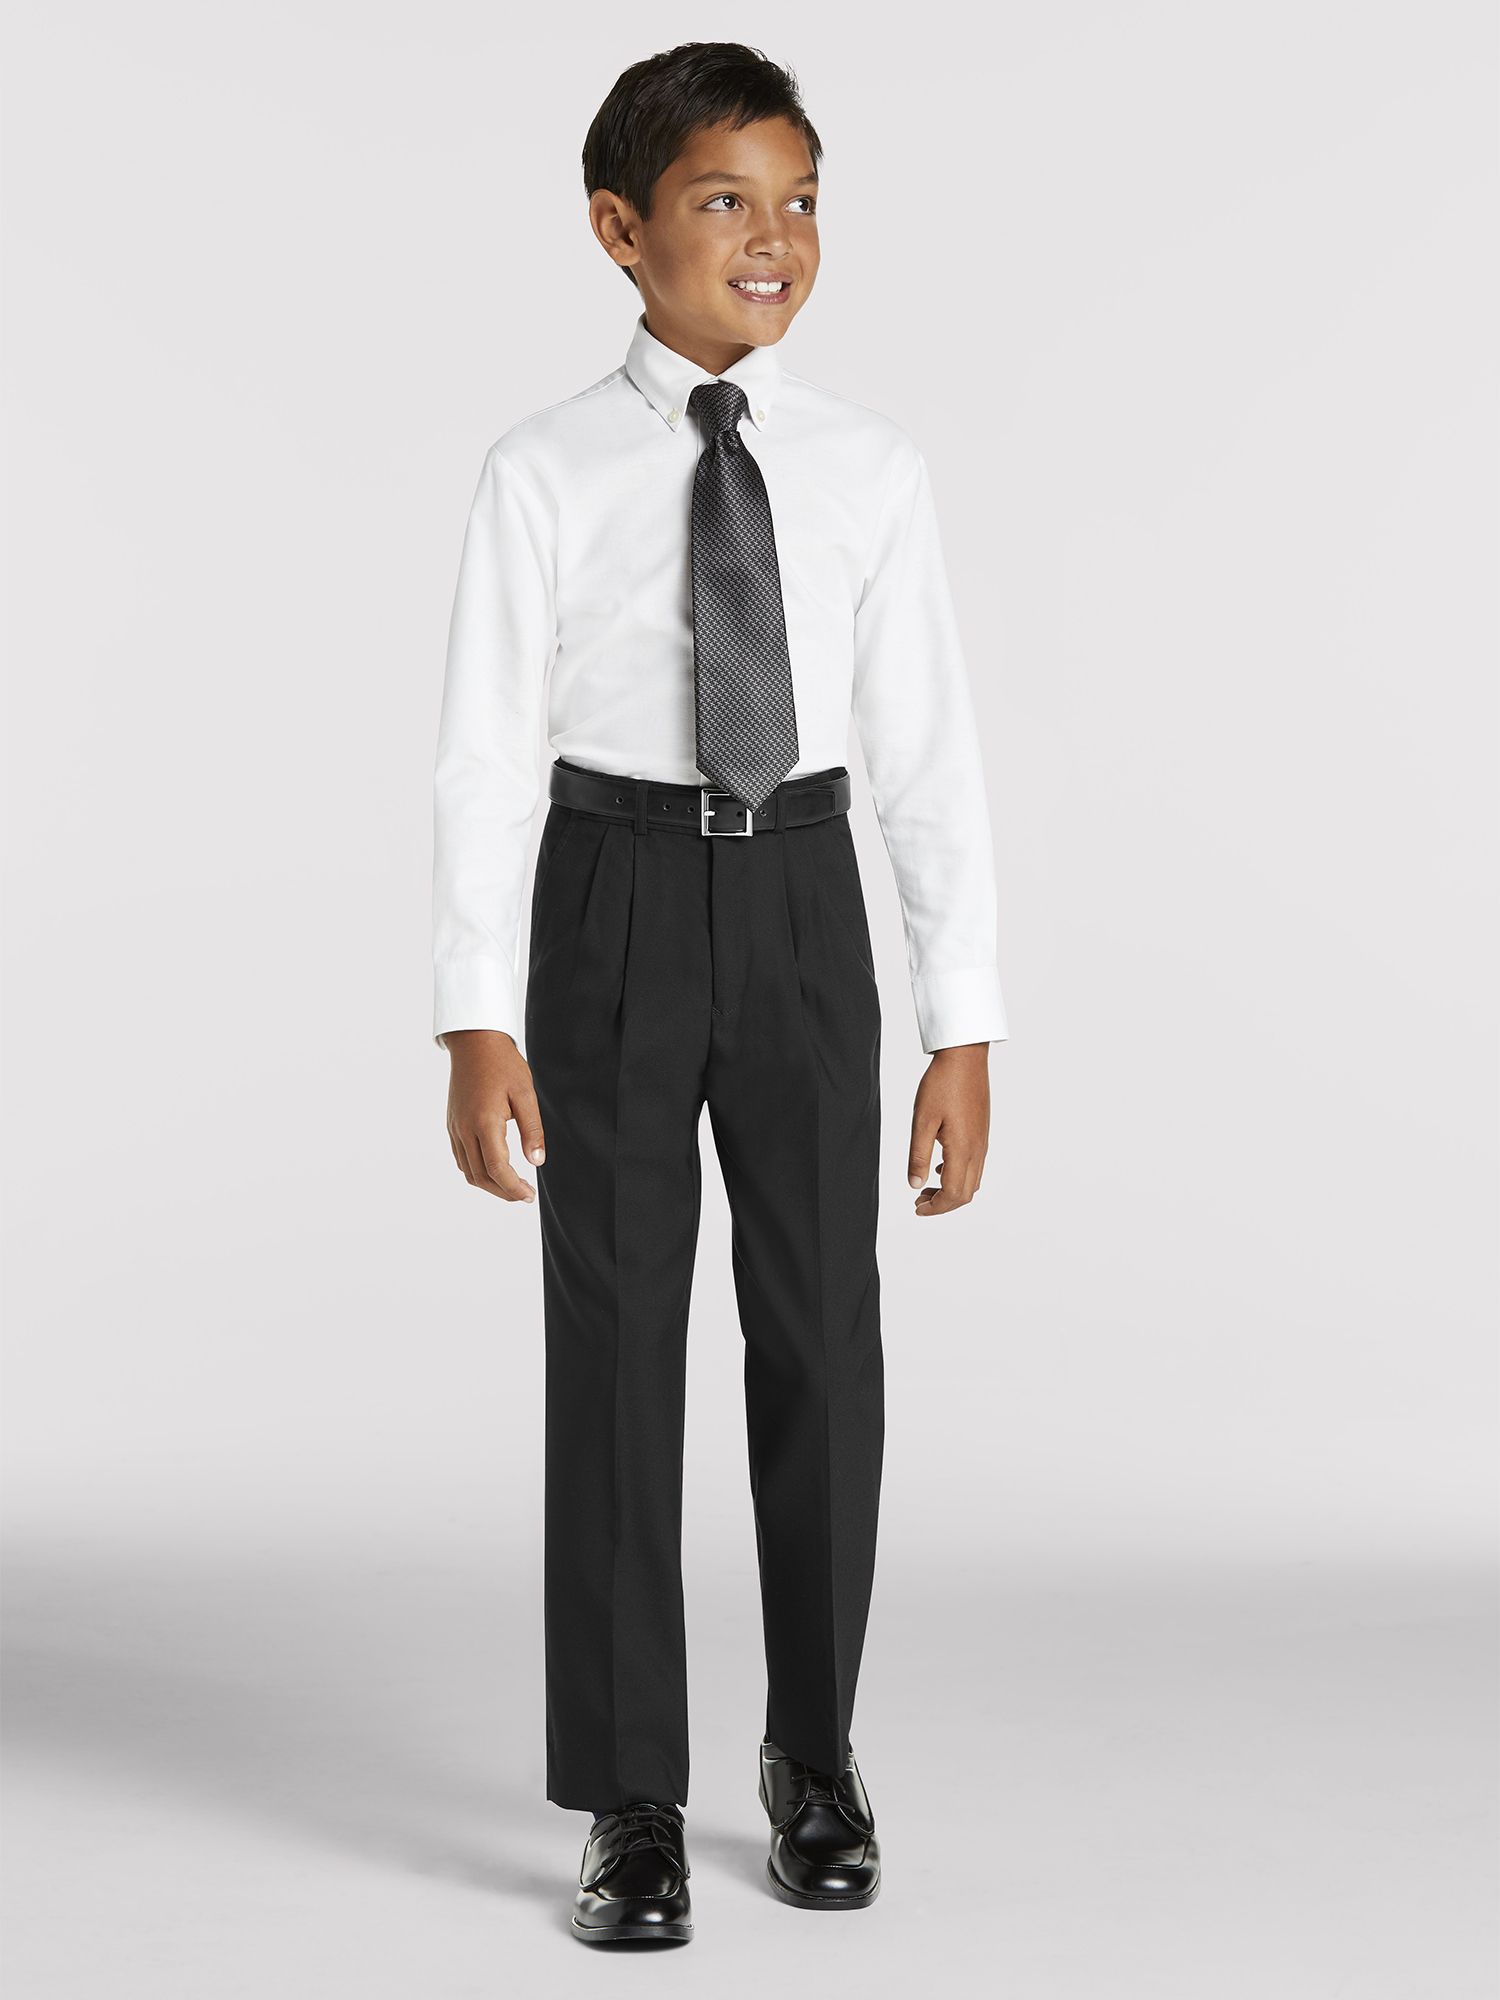 Boy's Black Suit Rental by Joseph & Feiss | Moores Clothing